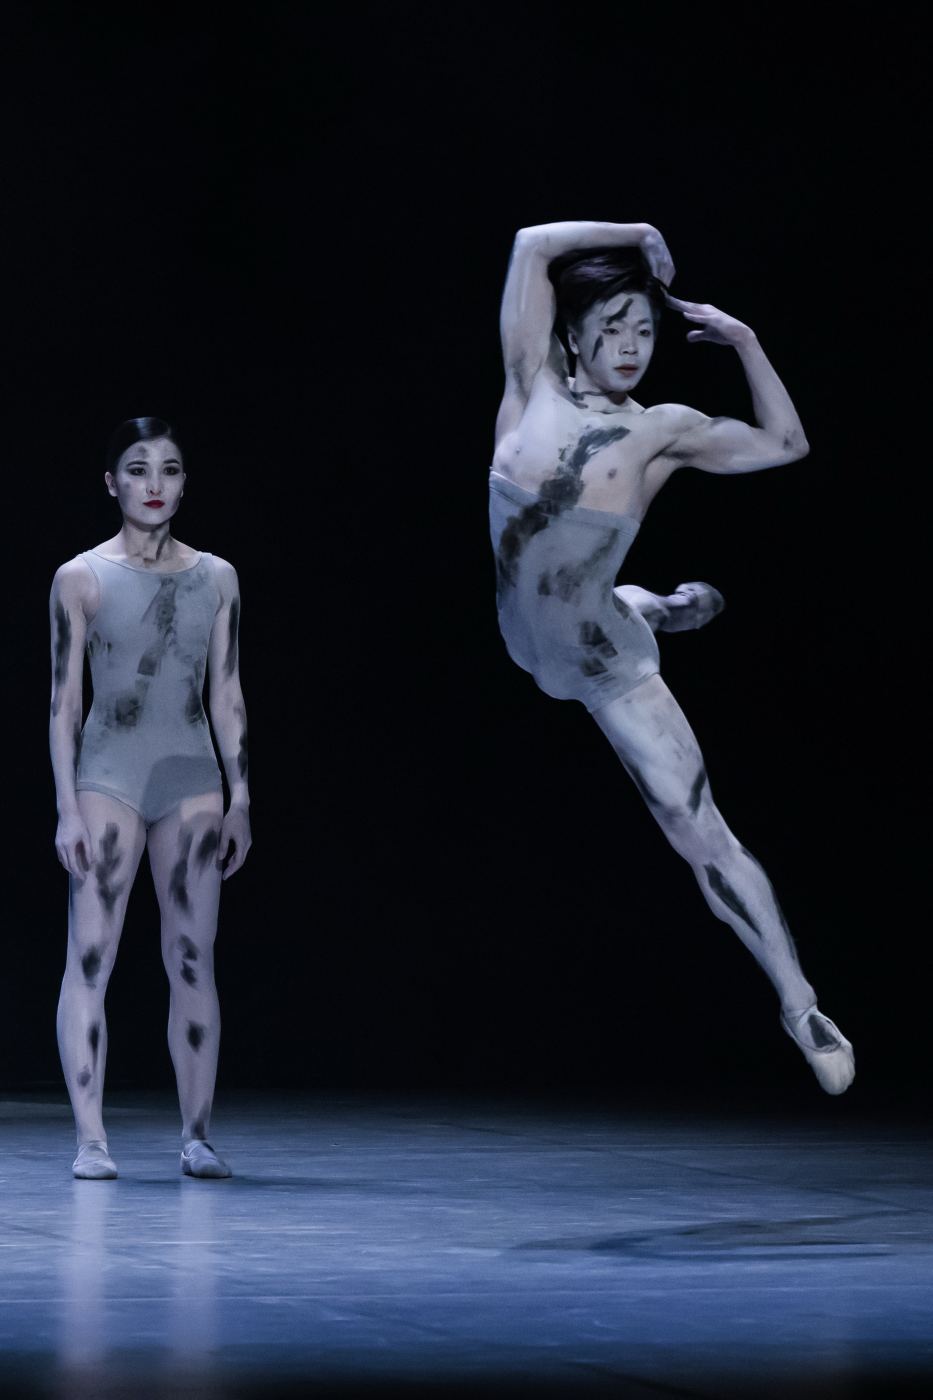 7. I.Furuhashi-Huber and M.Kiyota, “Sad Case” by S.León and P.Lightfoot, Ballet of the Hungarian State Opera 2022 © A.Nagy / Hungarian State Opera 